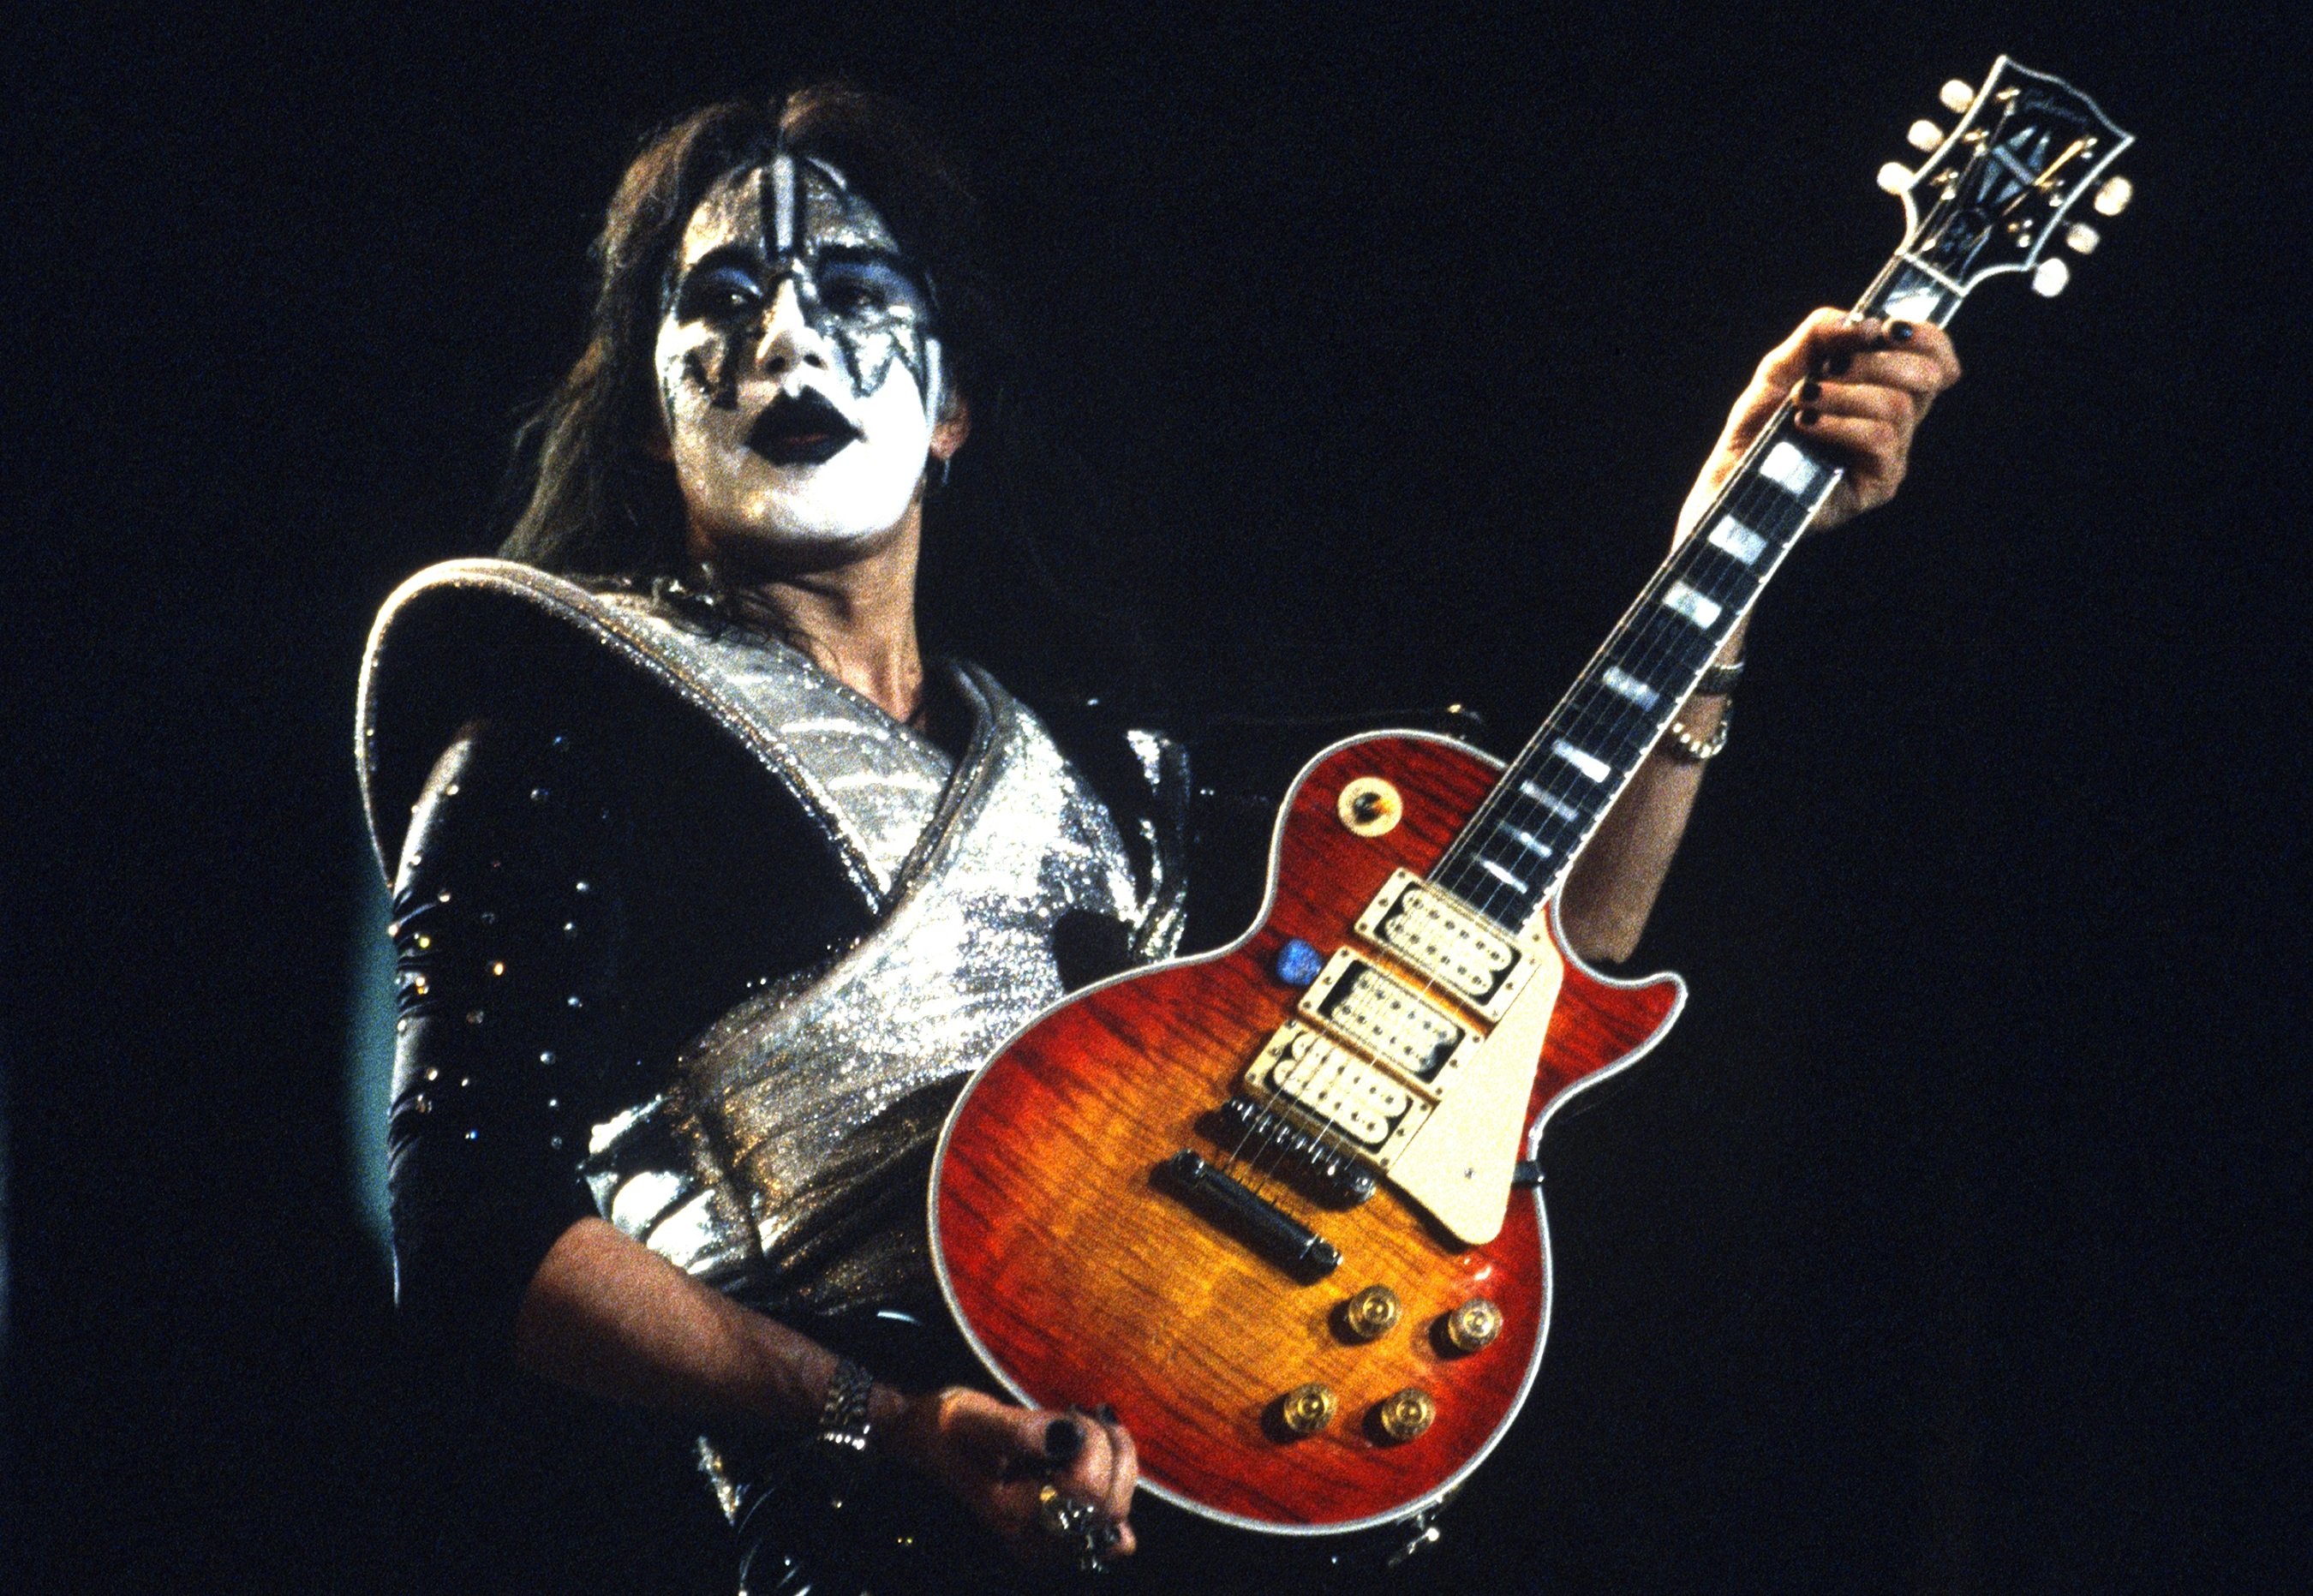 Kiss' Ace Frehley with a guitar